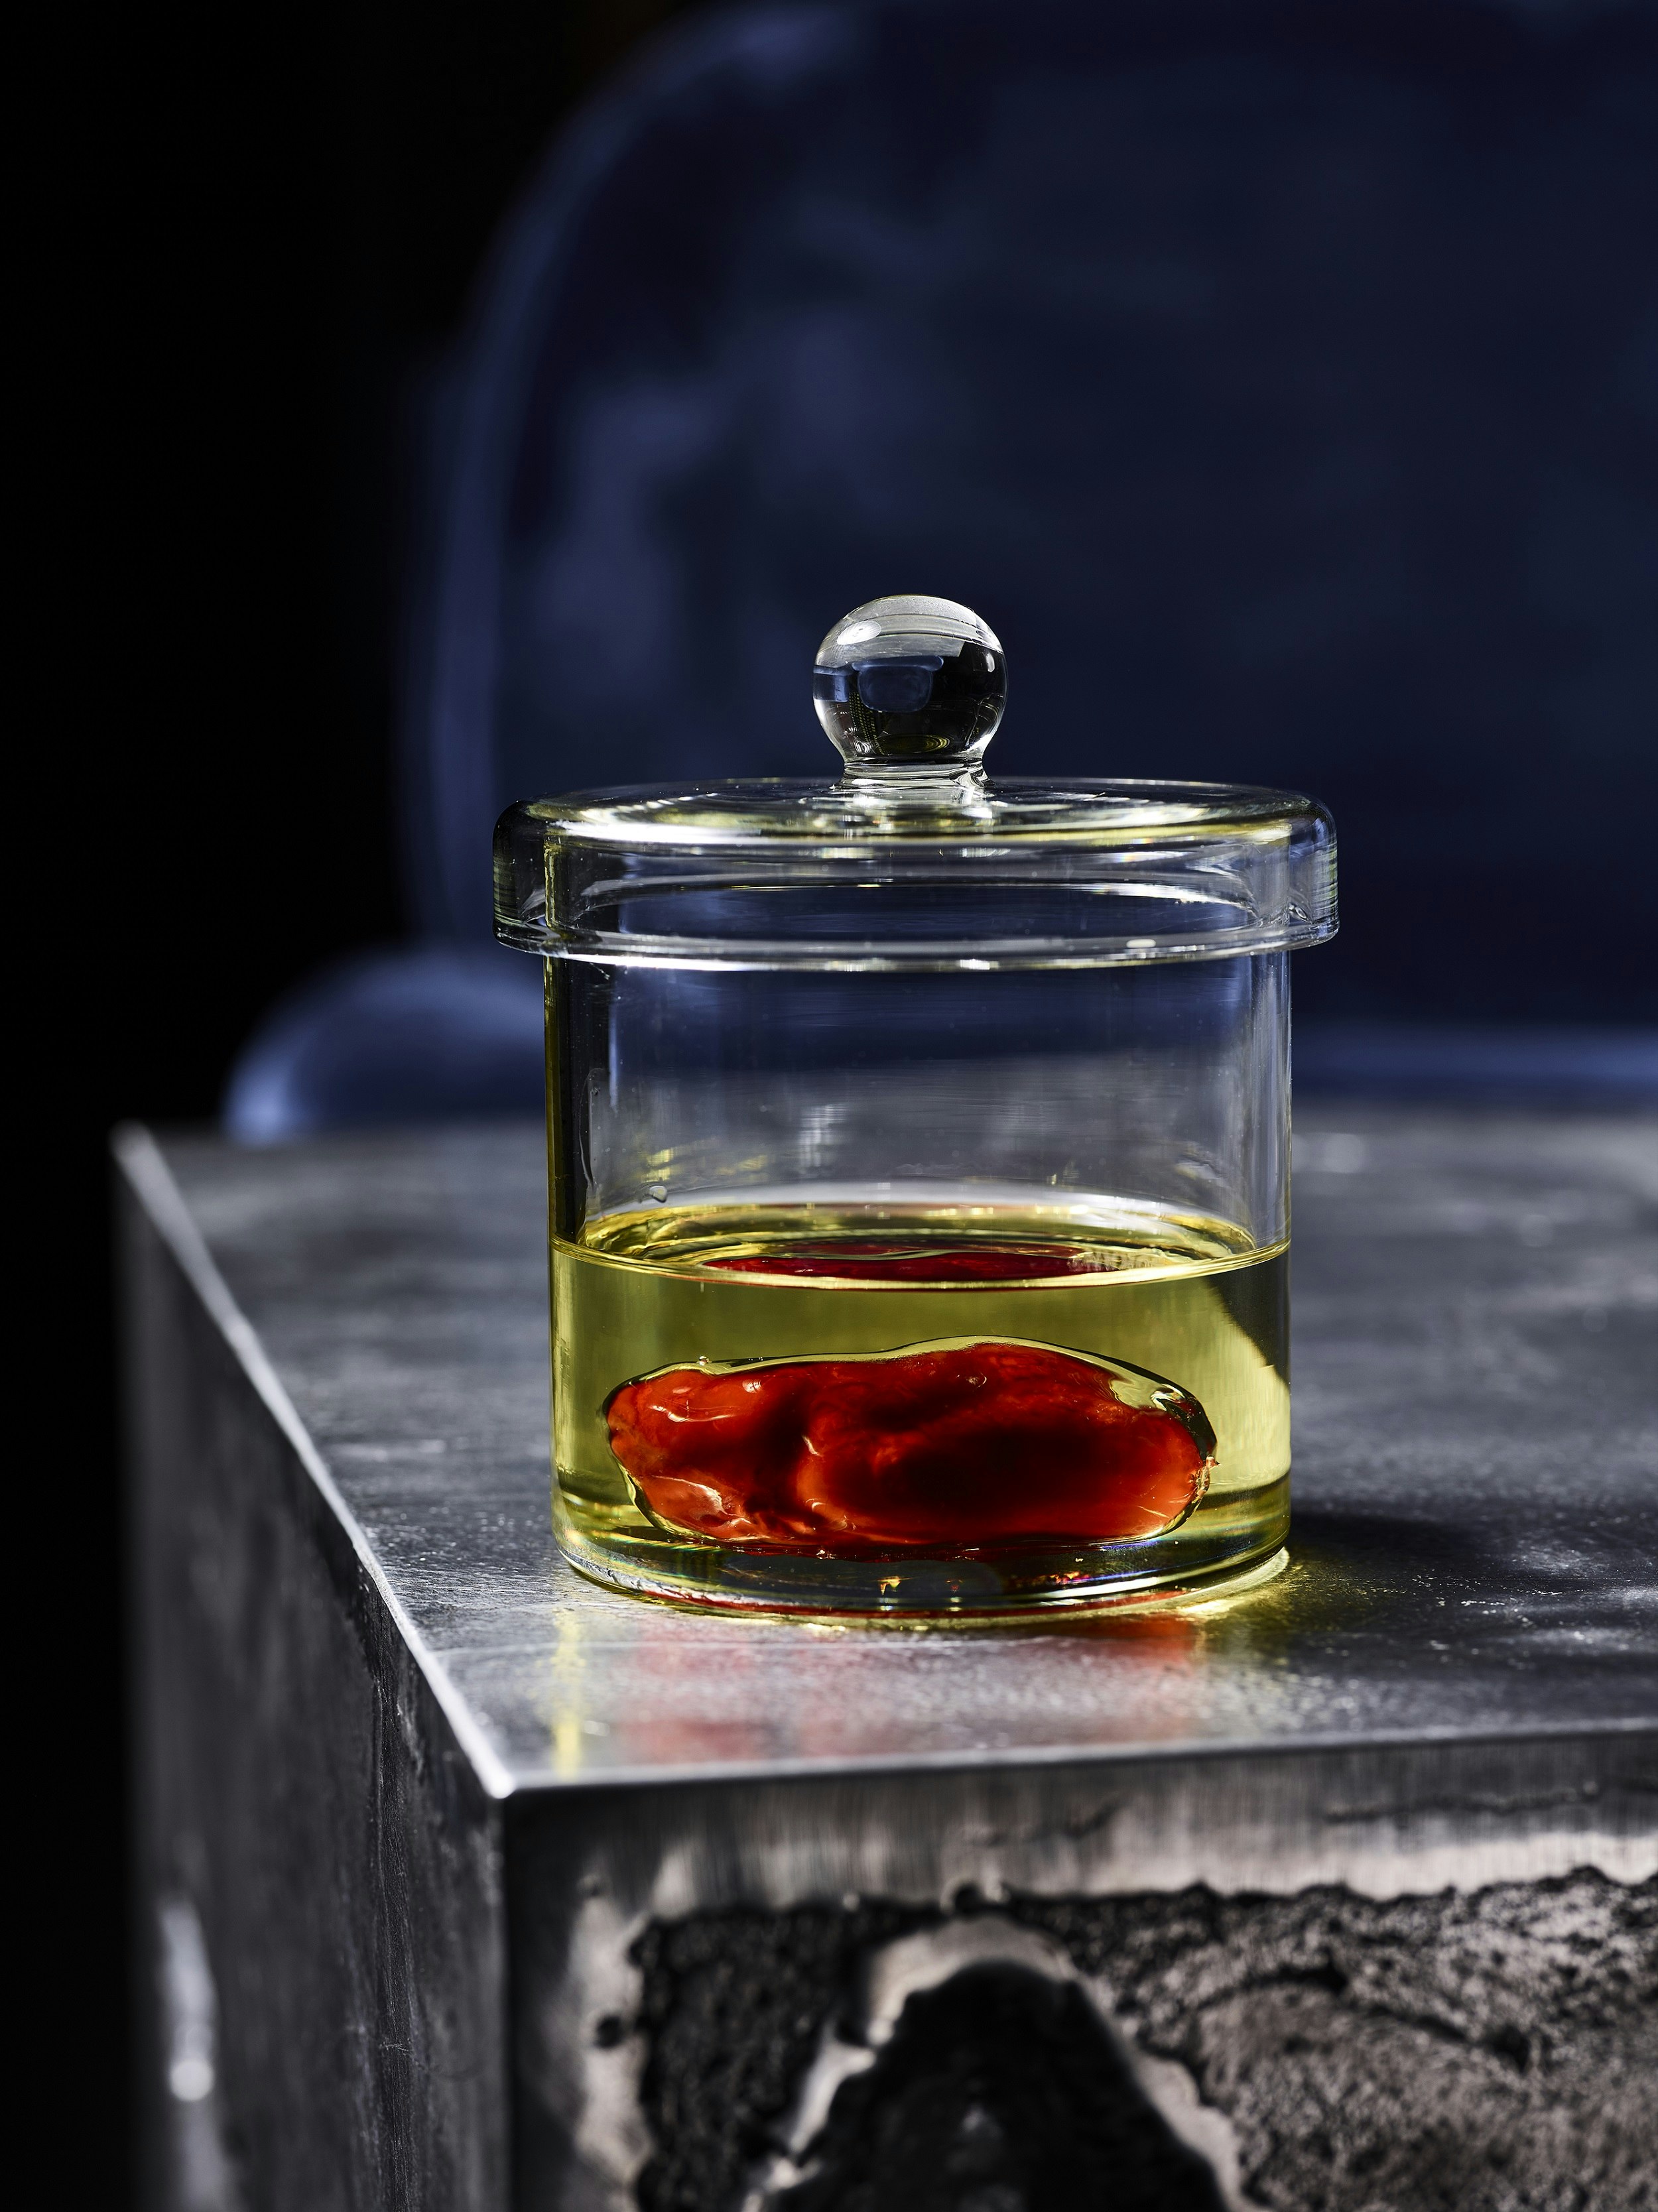 Sitting atop a dark marble table is a specimen jar filled with a golden liquid with a globular, red piece of food in it.